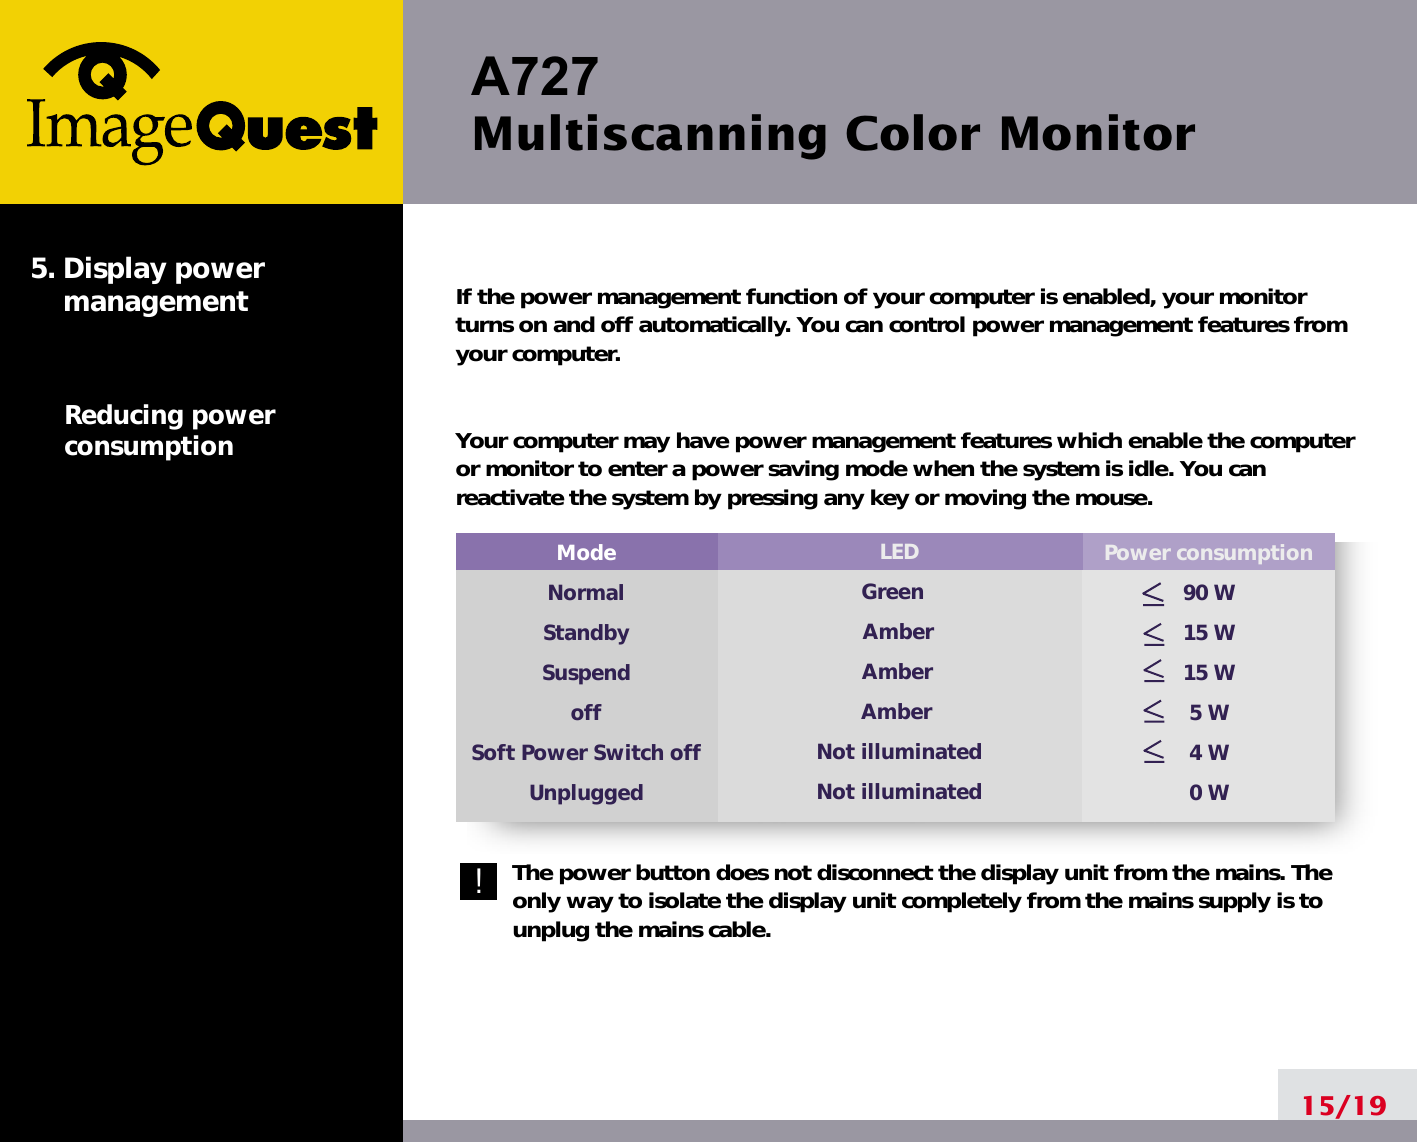 A727 Multiscanning Color Monitor15/19If the power management function of your computer is enabled, your monitorturns on and off automatically. You can control power management features fromyour computer.Your computer may have power management features which enable the computeror monitor to enter a power saving mode when the system is idle. You canreactivate the system by pressing any key or moving the mouse.The power button does not disconnect the display unit from the mains. Theonly way to isolate the display unit completely from the mains supply is tounplug the mains cable.Power consumption90 W 15 W15 W5 W4 W0 WModeNormalStandbySuspendoffSoft Power Switch offUnplugged5. Display powermanagementReducing powerconsumption!LEDGreenAmberAmberAmberNot illuminatedNot illuminated